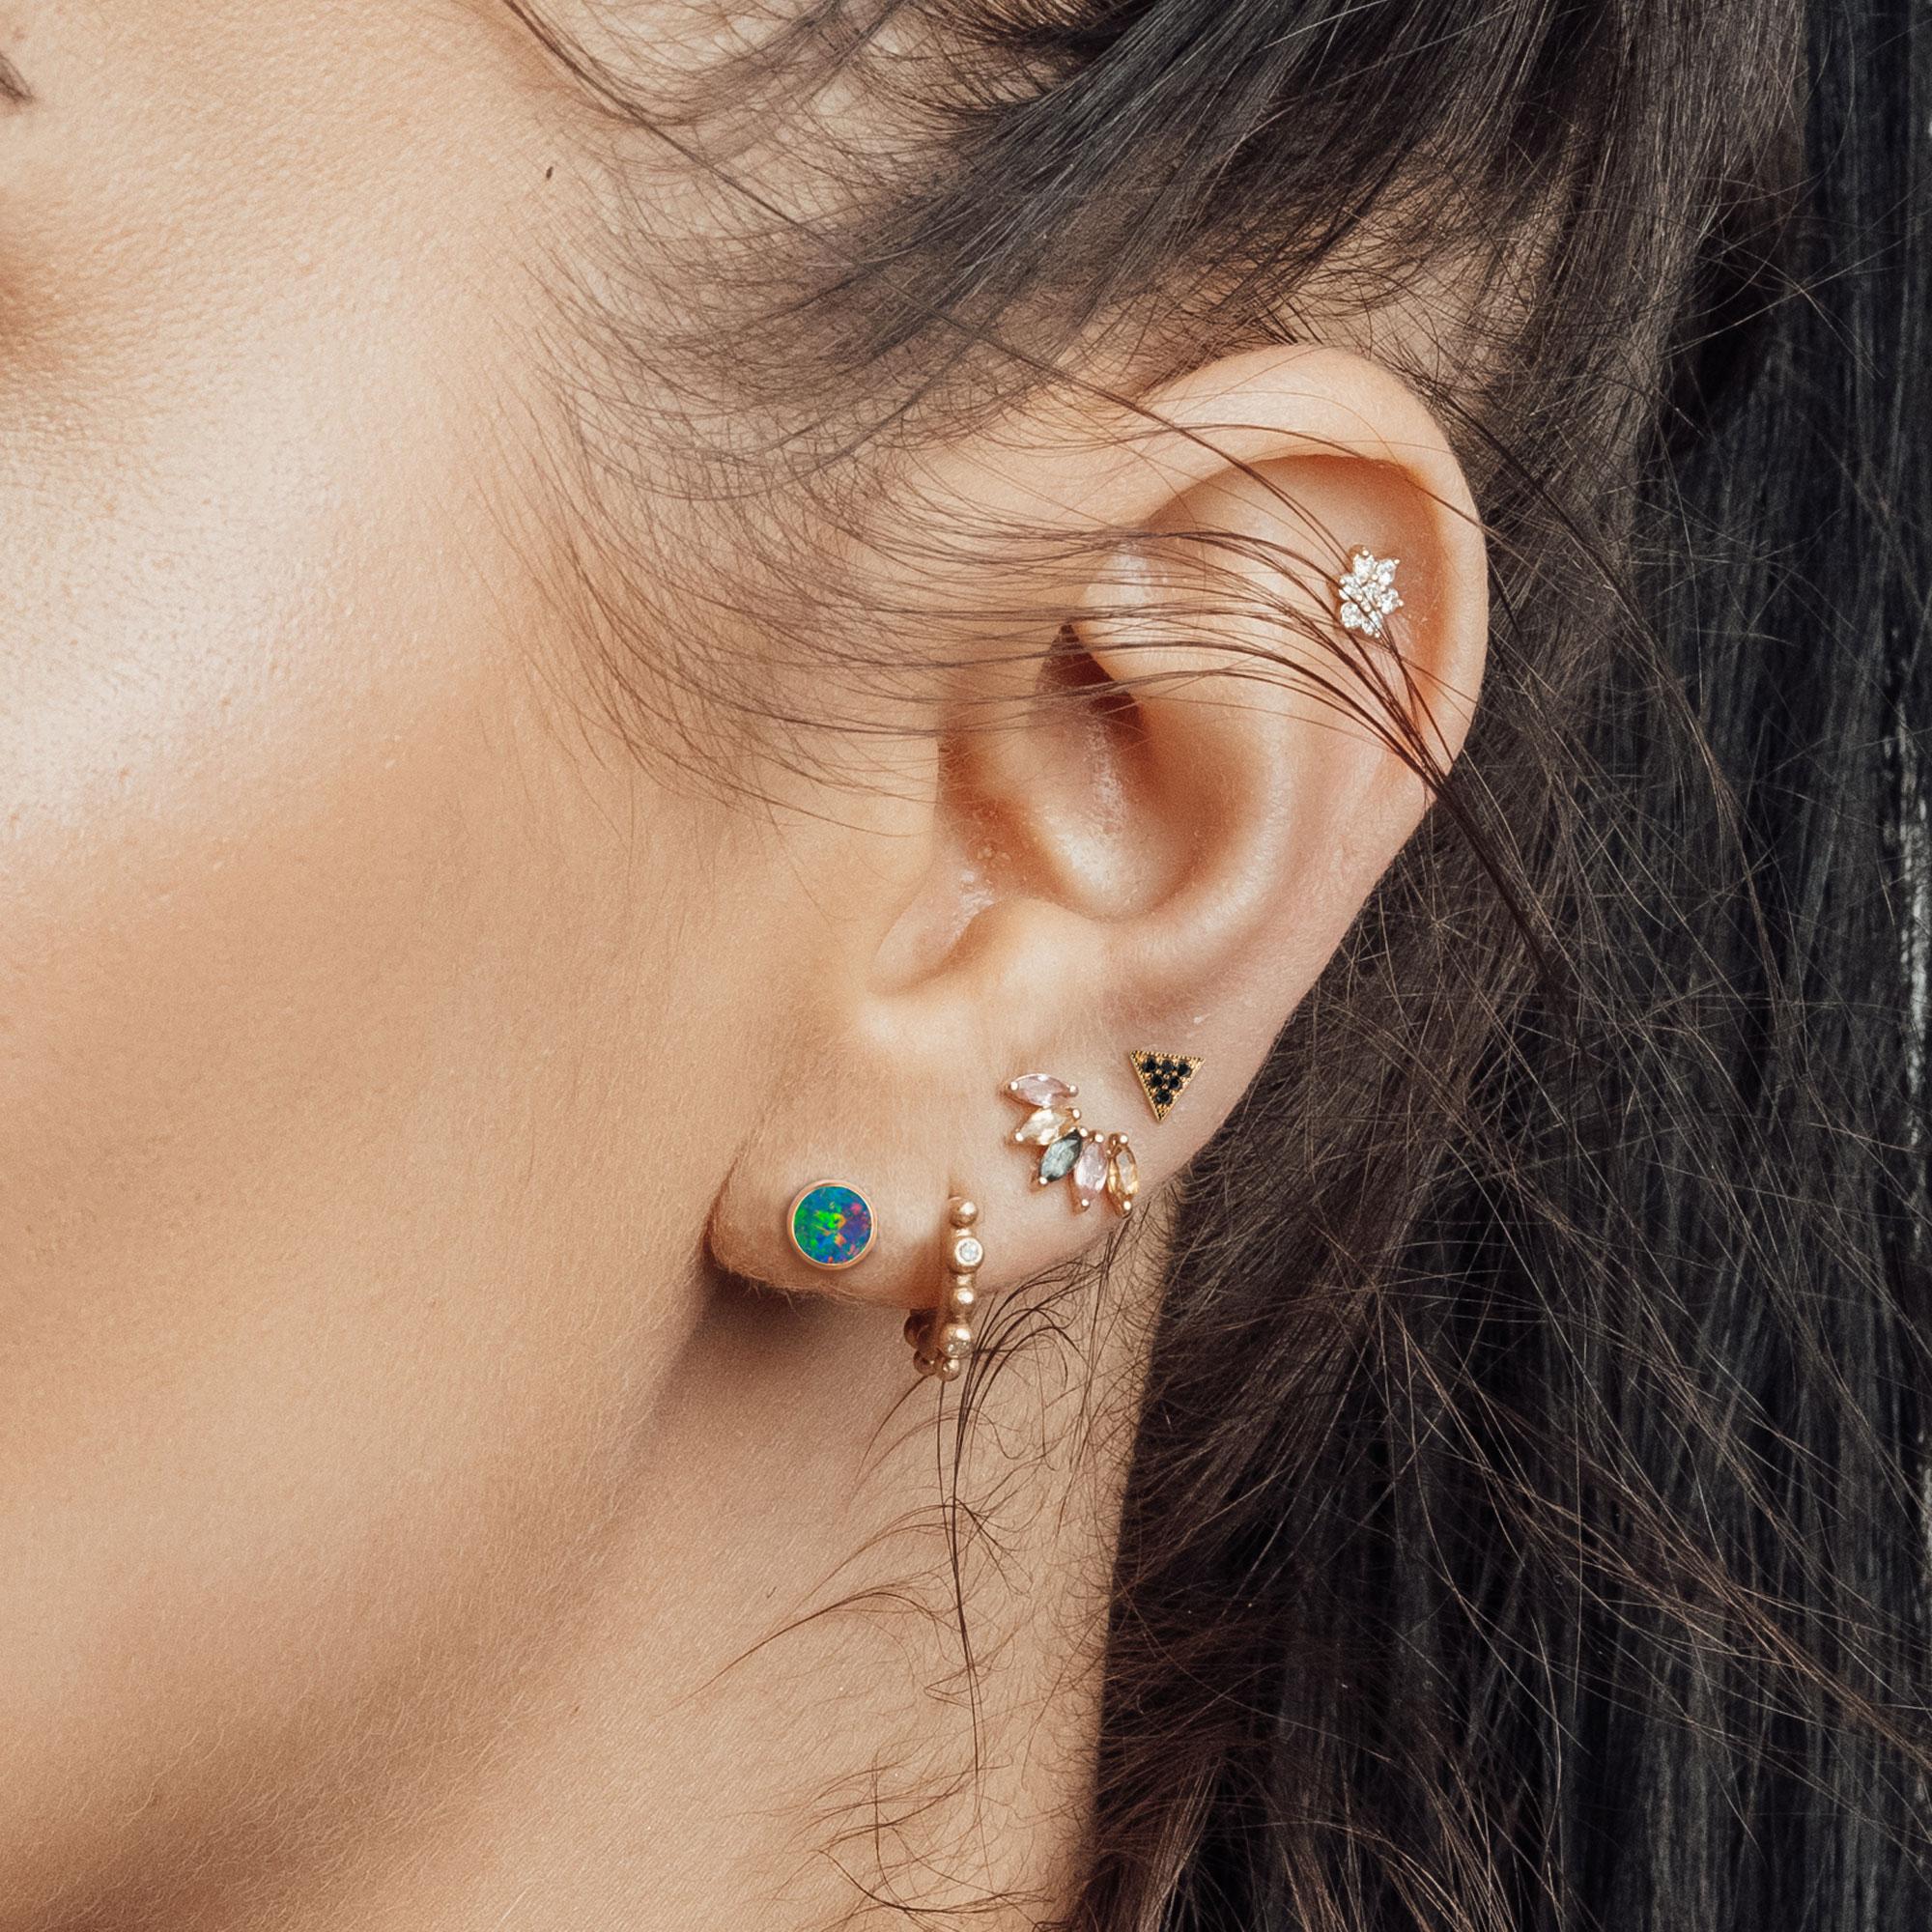 Calling all globe trotters! This brightly polished 18k gold solitaire design of gold stud earrings. This gorgous beauty features a vibrant opal gemstone bezel set, giving it an otherworldly-beauty reminiscent of an earth globe. Add a contemporary,